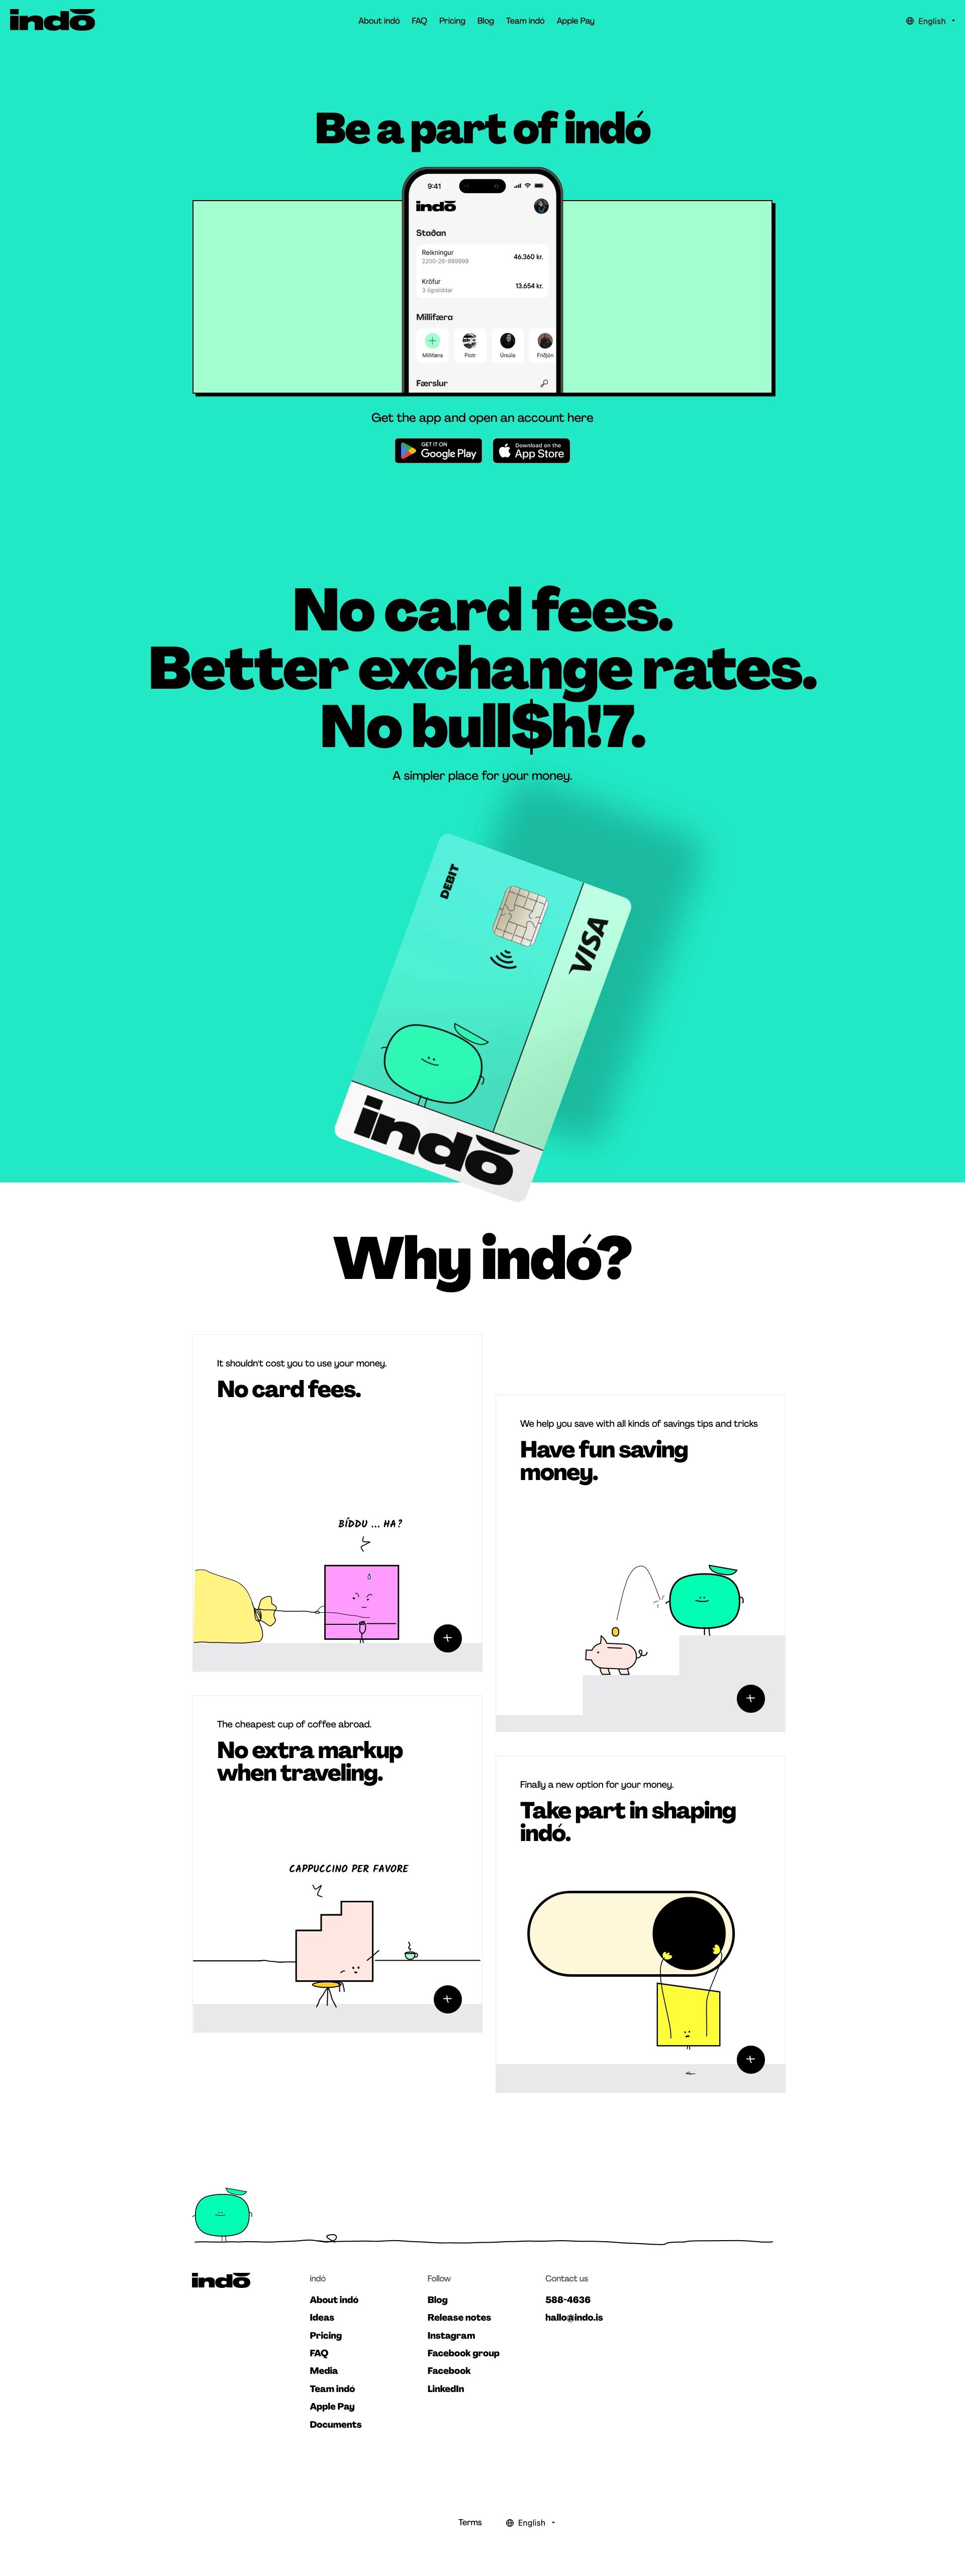 indó Landing Page Example: A simpler place for your money. No transaction fees. Higher interest rates. No extra fees when traveling. Take part in shaping indó.